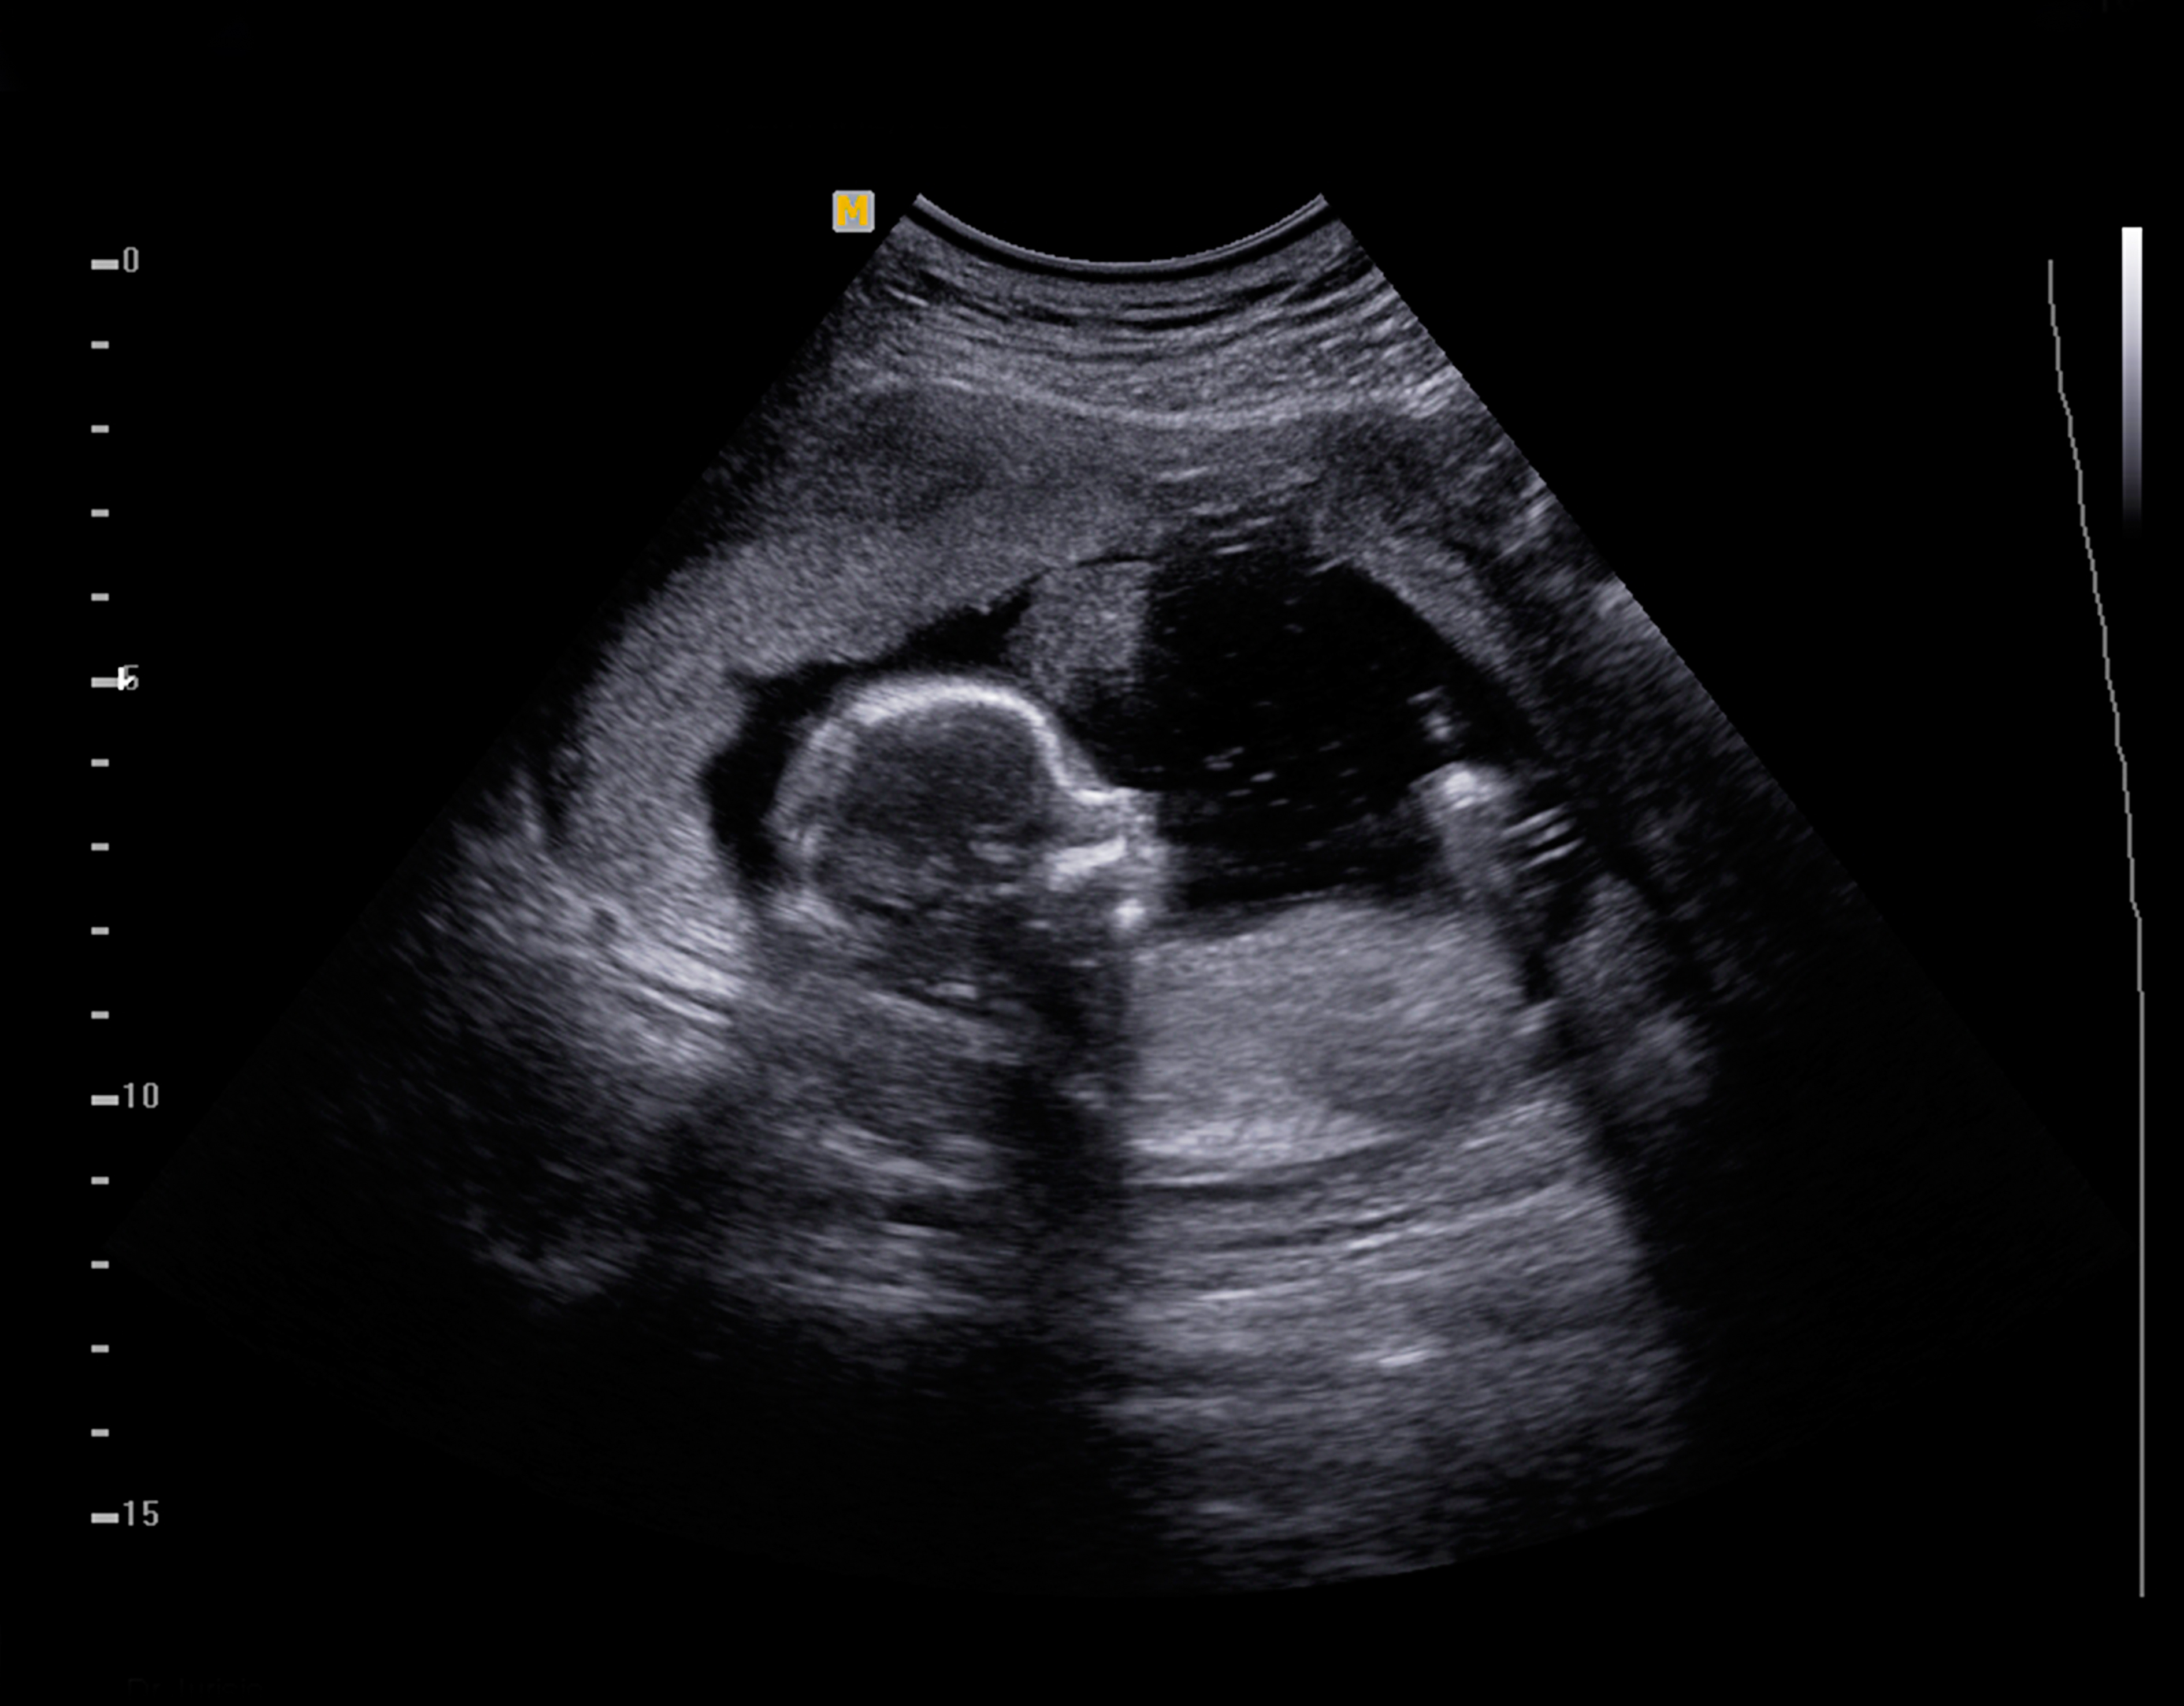 Baby Ultrasound PNG-PlusPNG.c